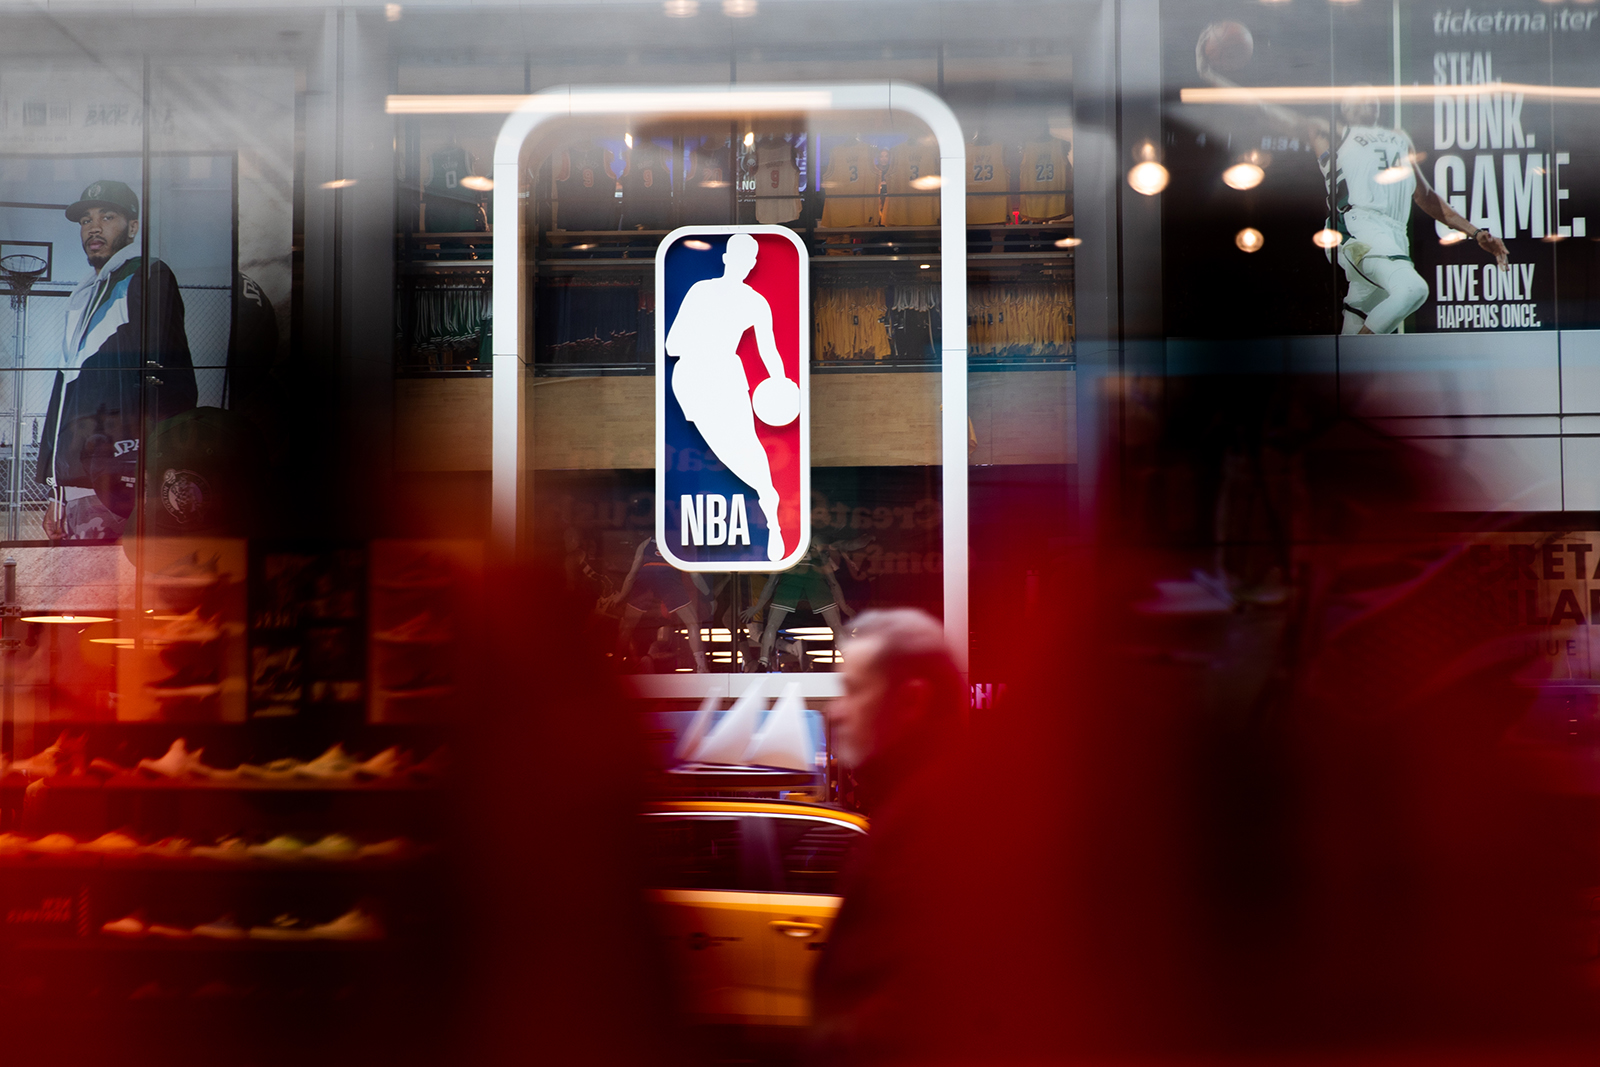 An NBA logo is shown at the 5th Avenue NBA store on March 12, 2020 in New York City. 